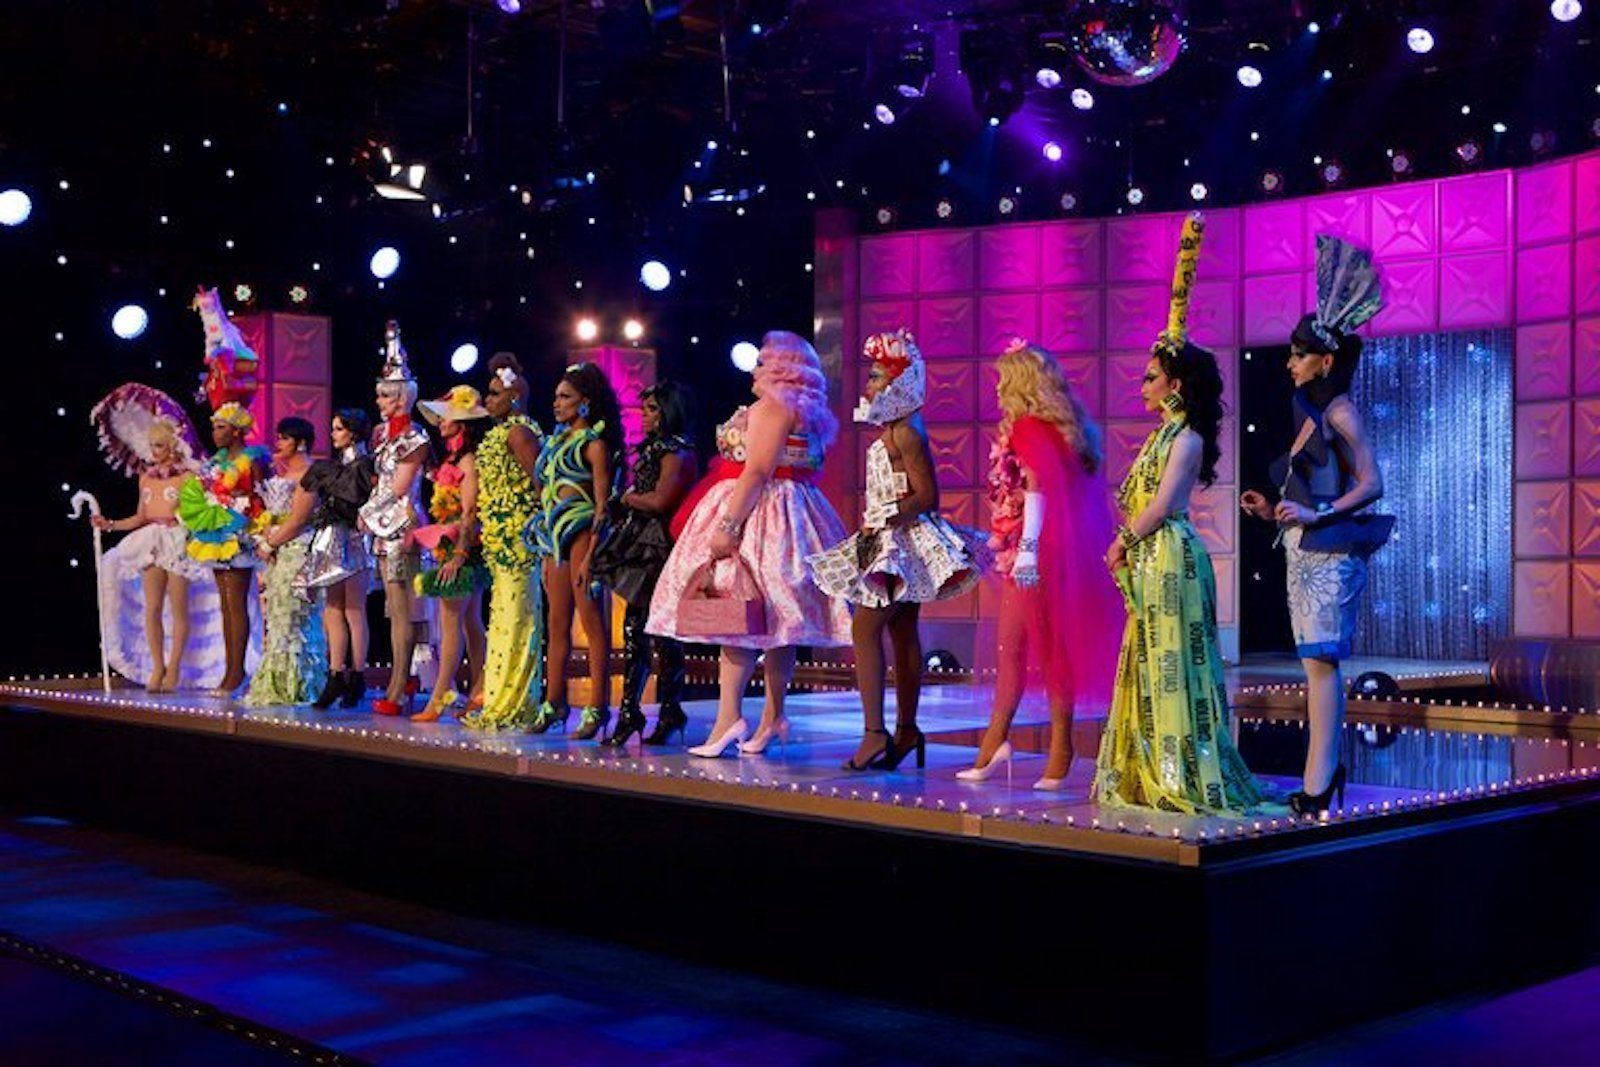 Drag Race season 10 episode 1 recap: 'Is it usually this intense?' A newbie's hot take